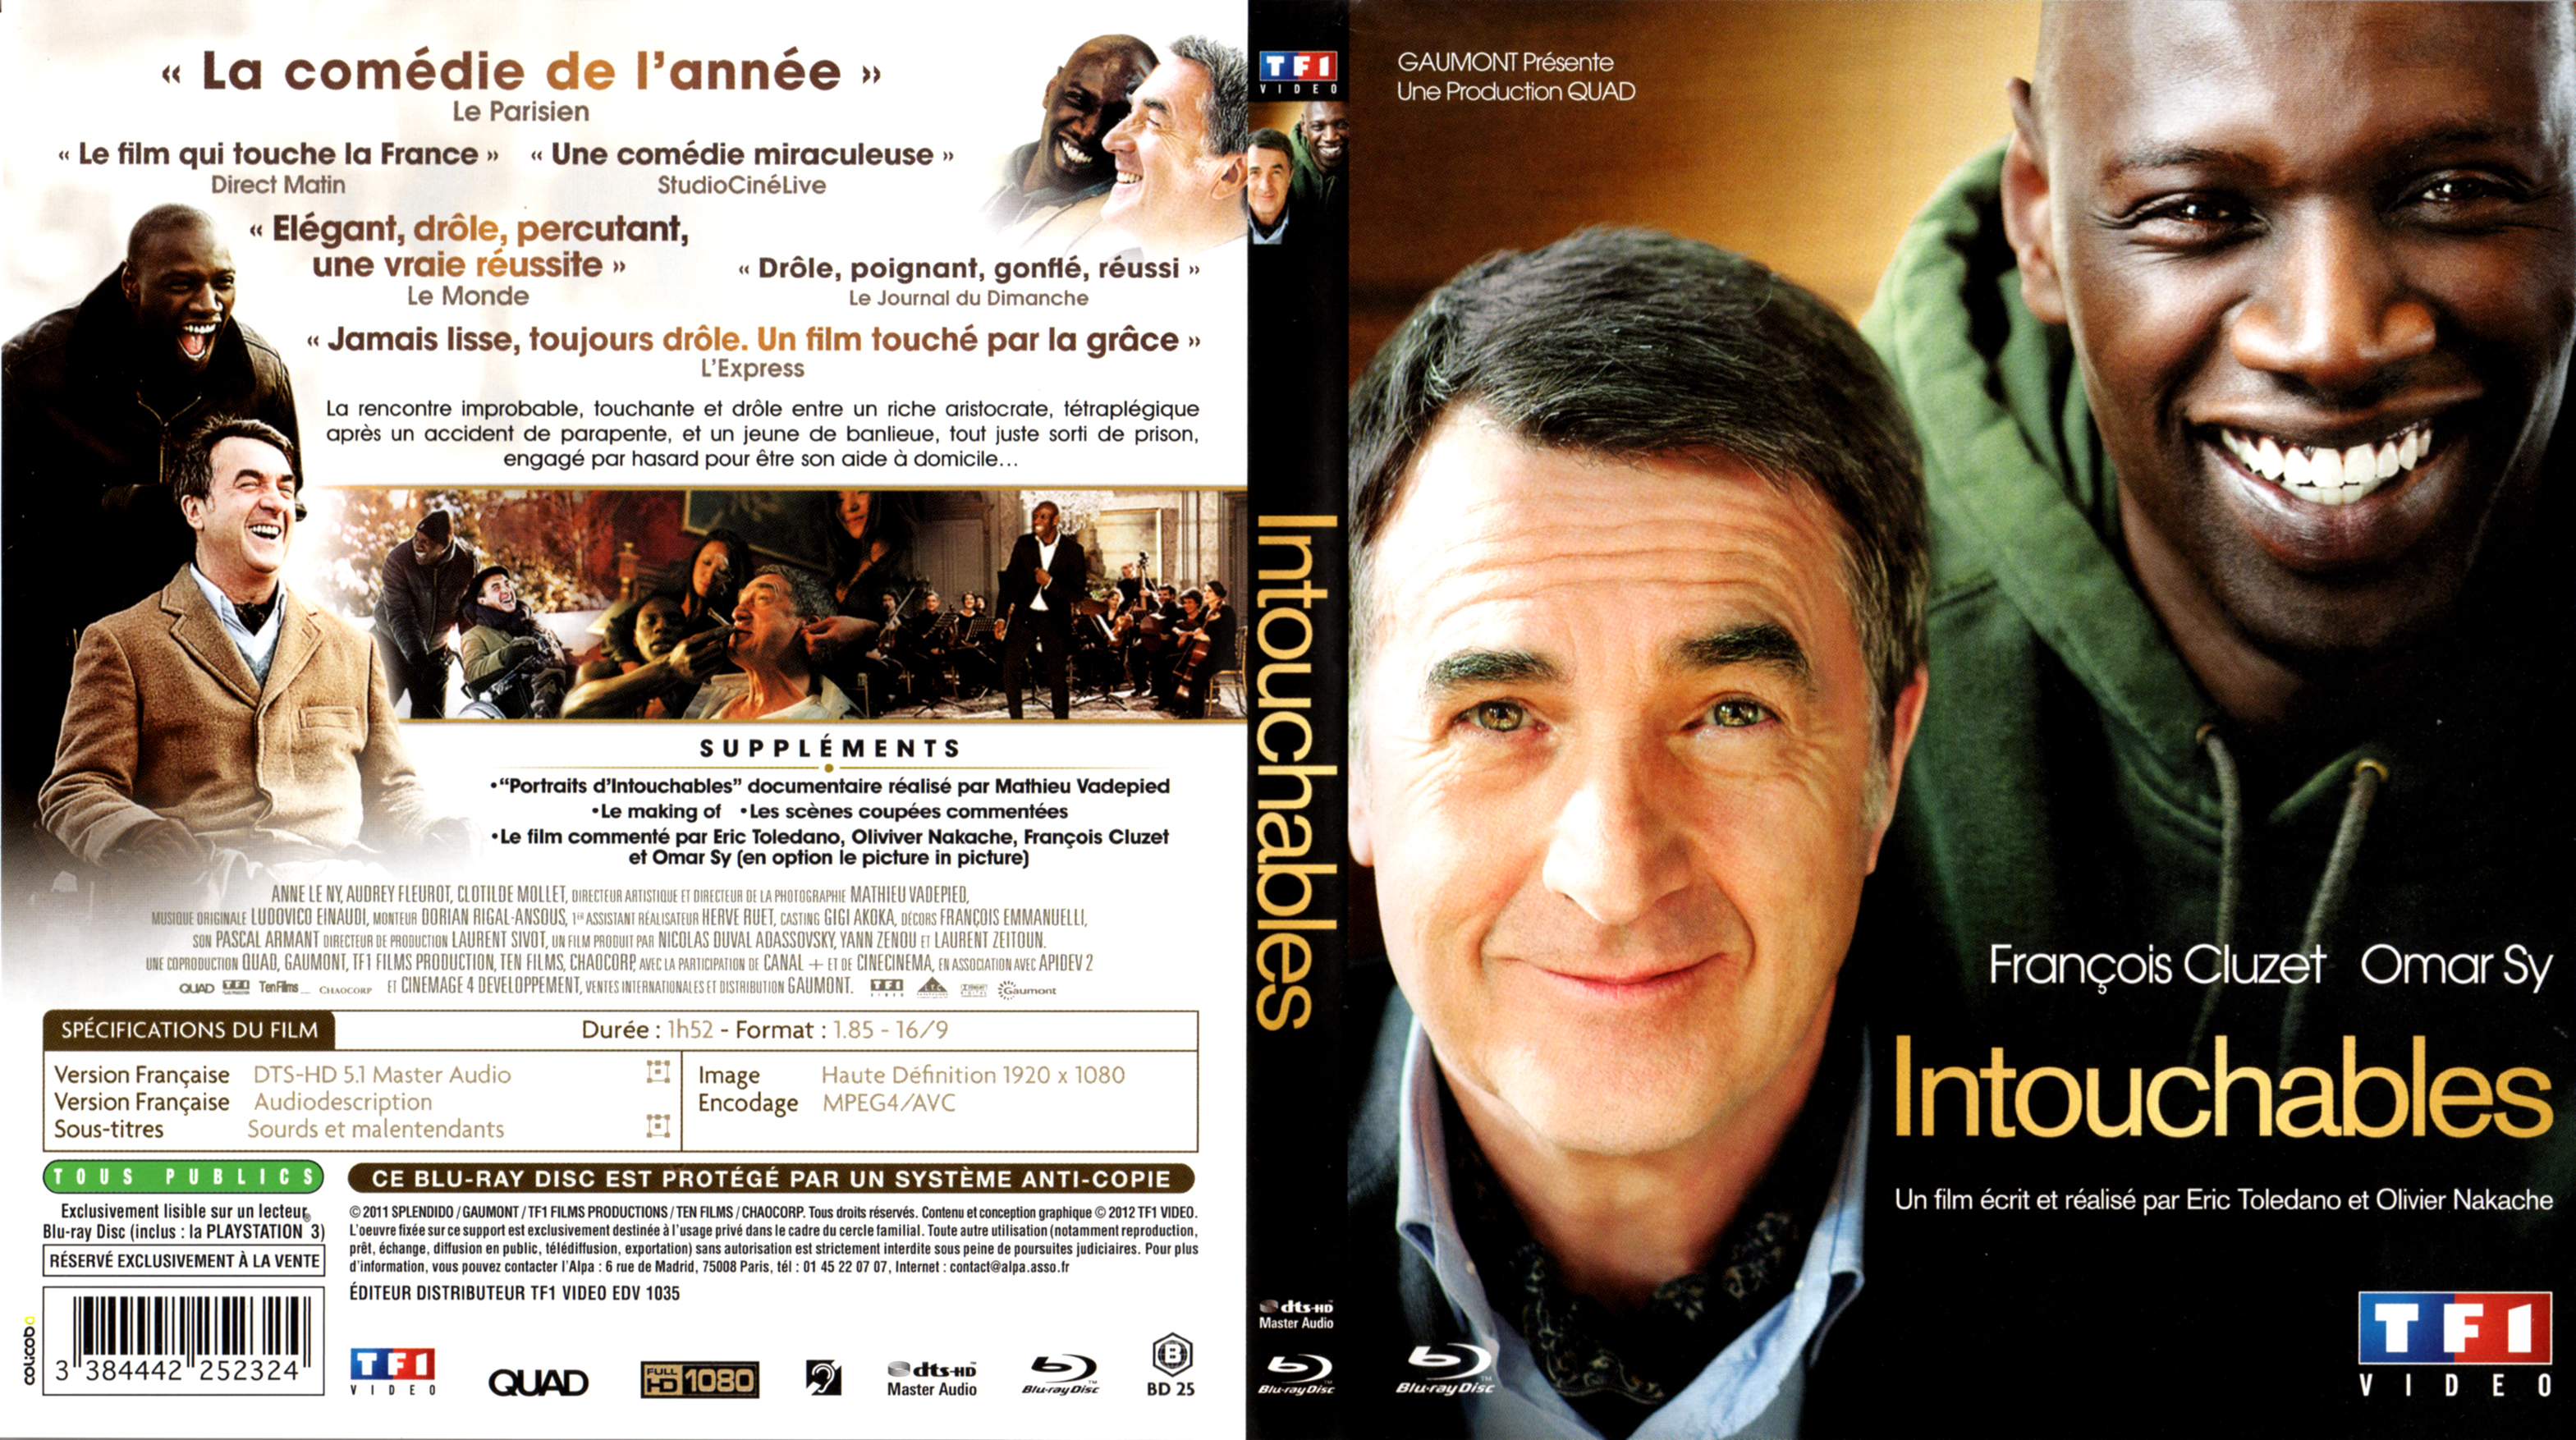 Jaquette DVD Intouchables (BLU-RAY)